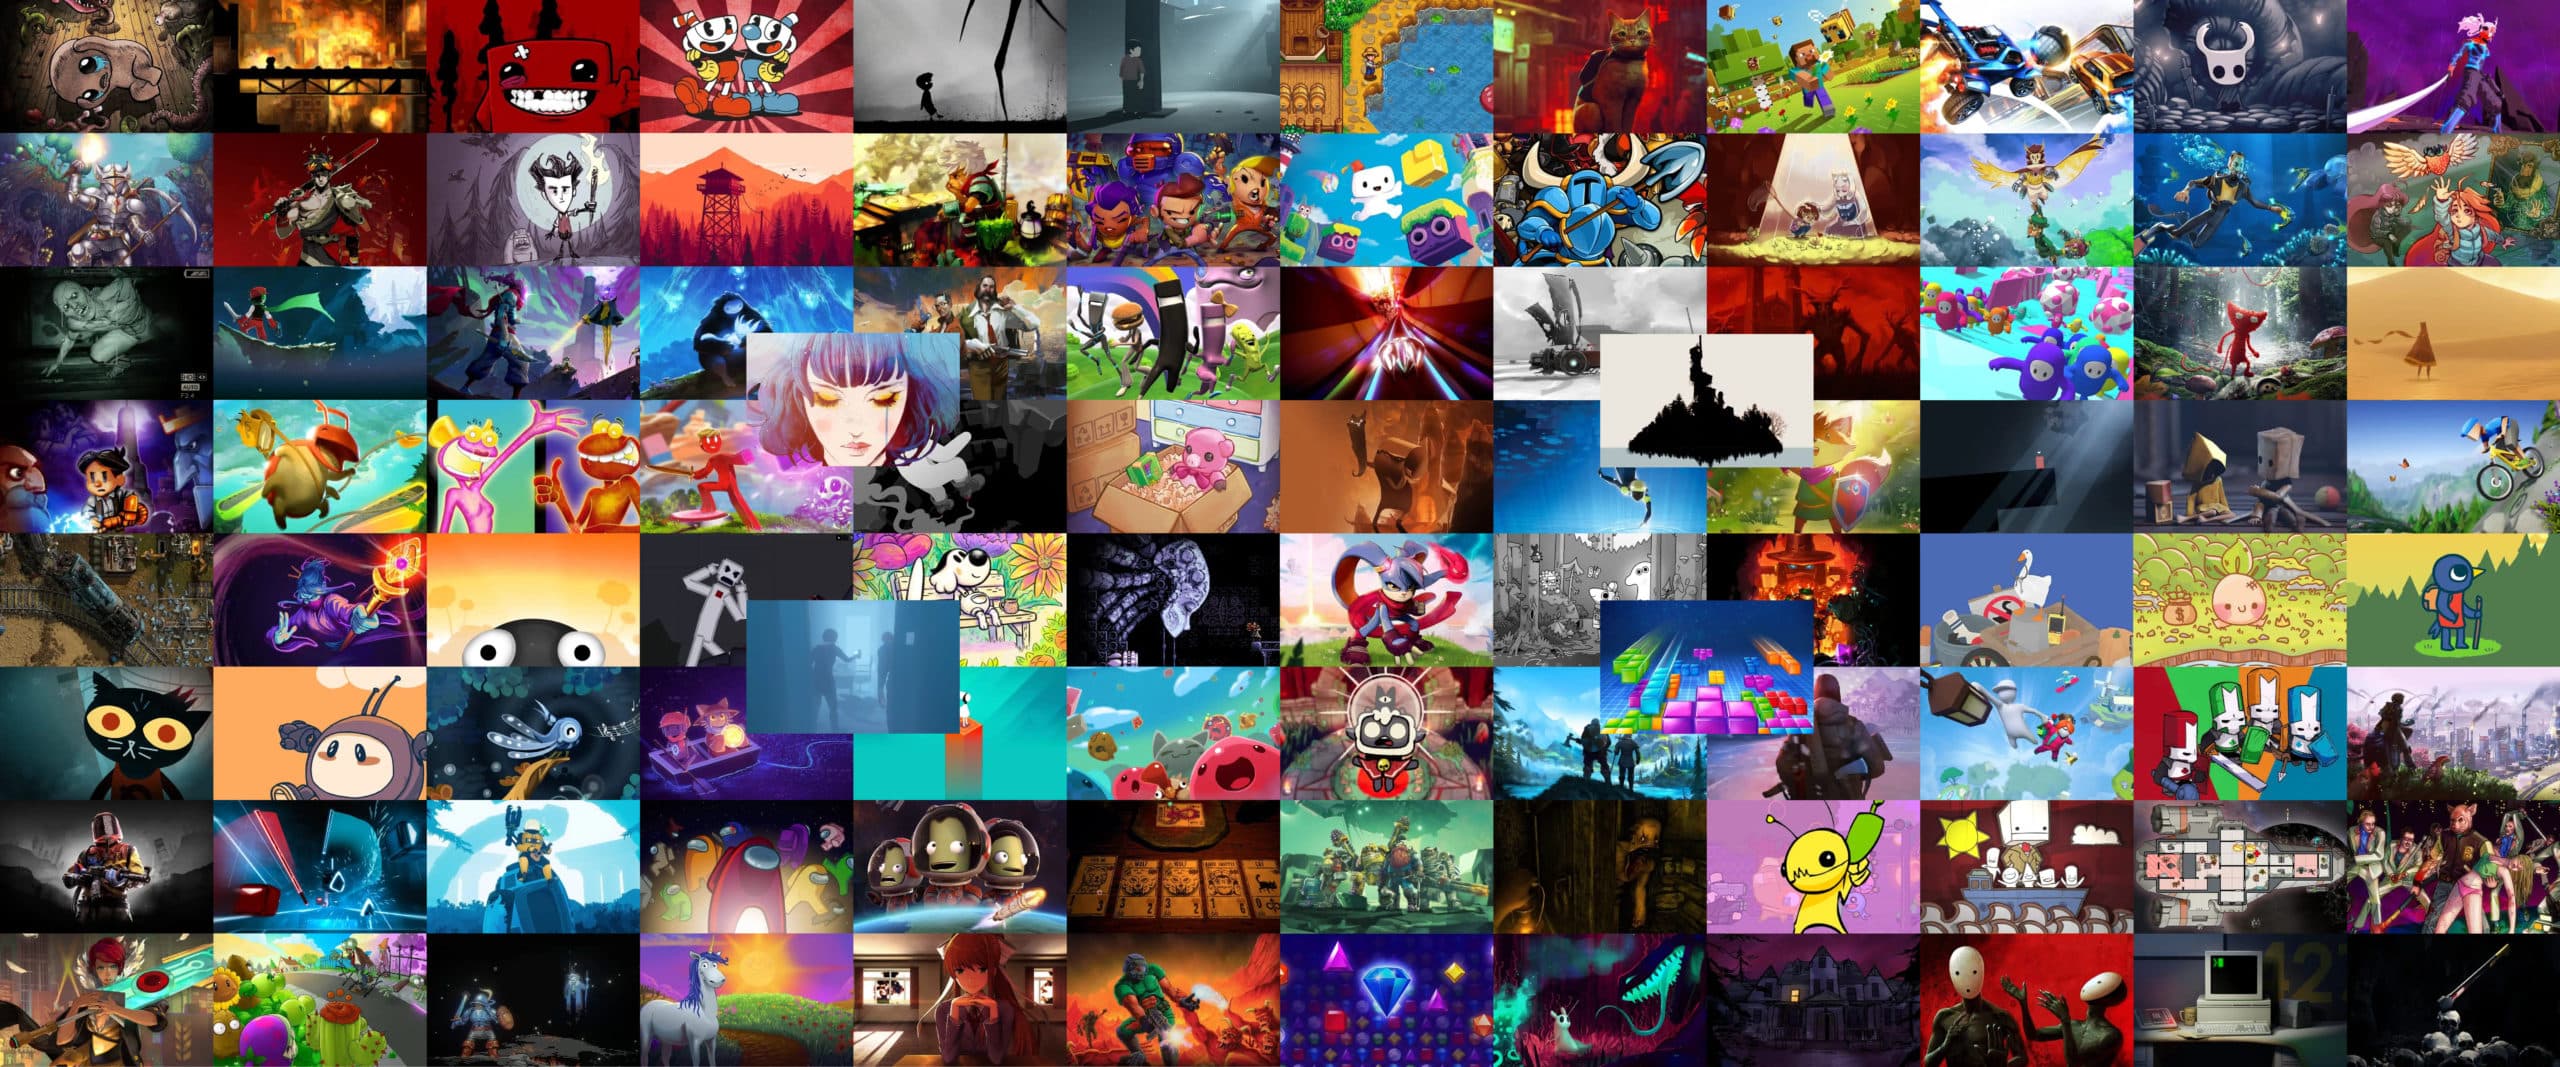 50 Best Indie Games of All Time (2021 Edition)